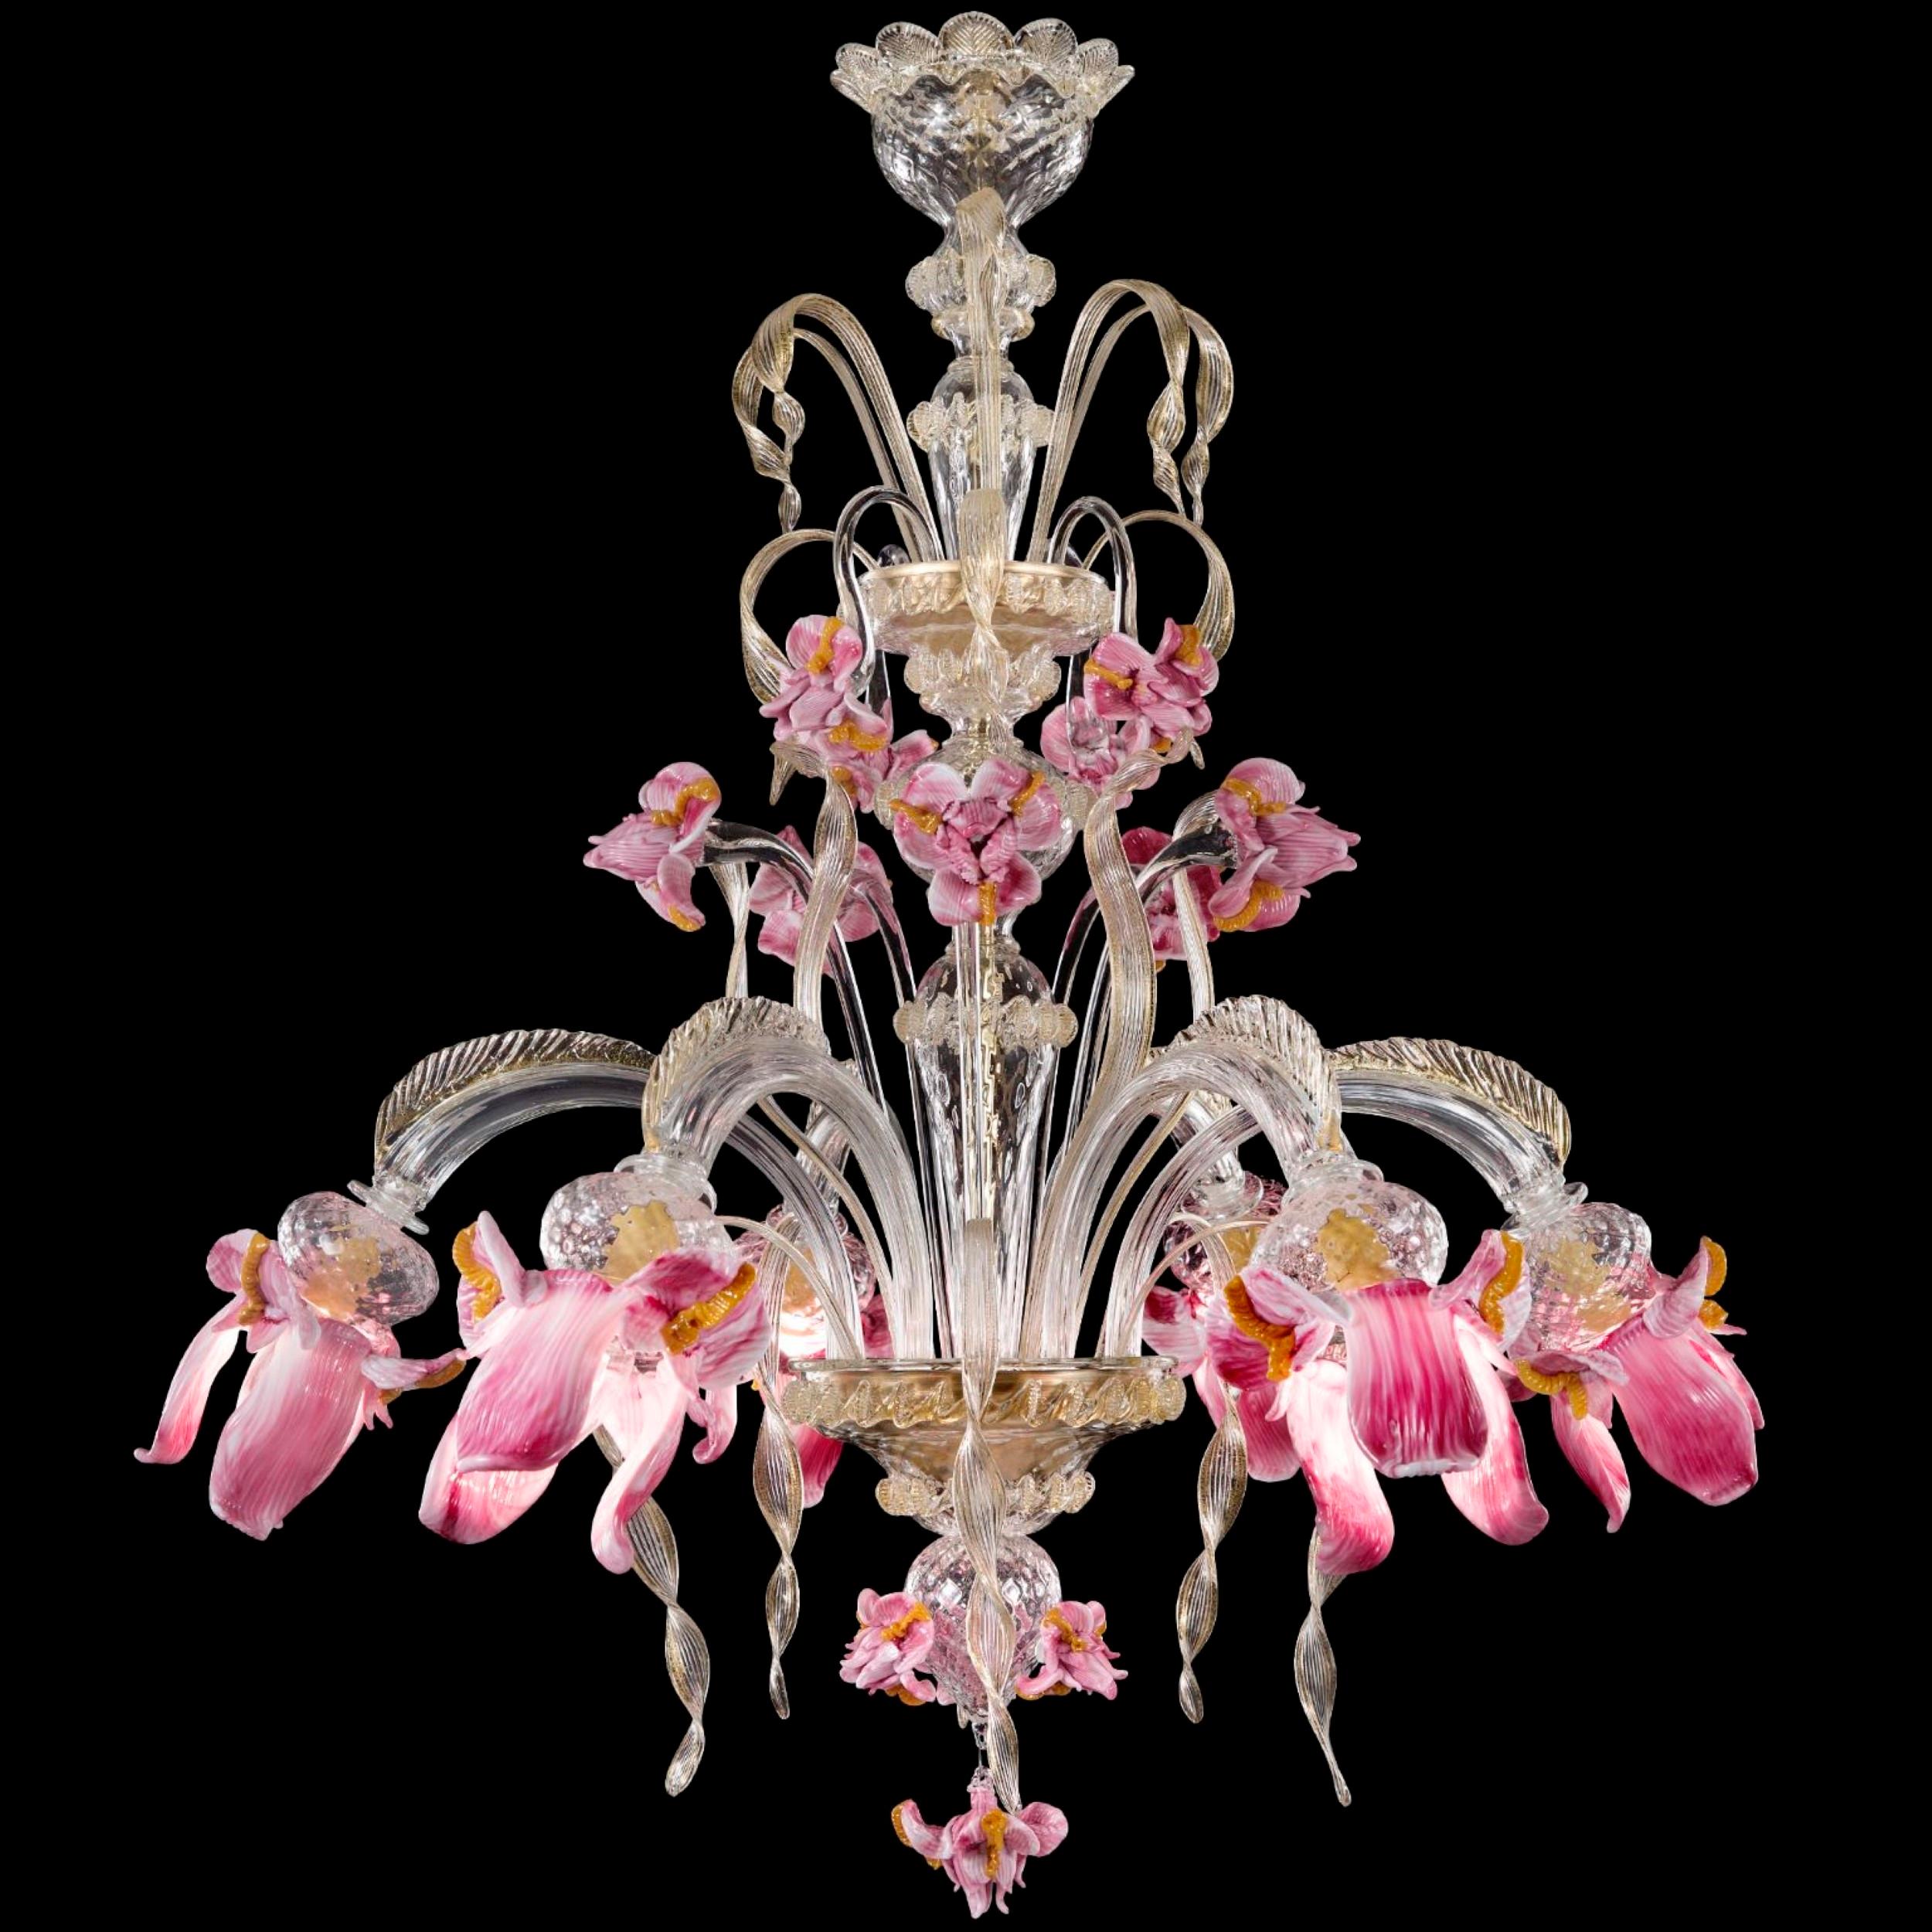 Artistic chandelier 6 arms clear-gold-pink in Murano glass Iris garden by Multiforme.
Original and innovative artistic glass collection Iris garden. A collection inspired from the flowers. Iris garden is a lighting work that stands out thanks to